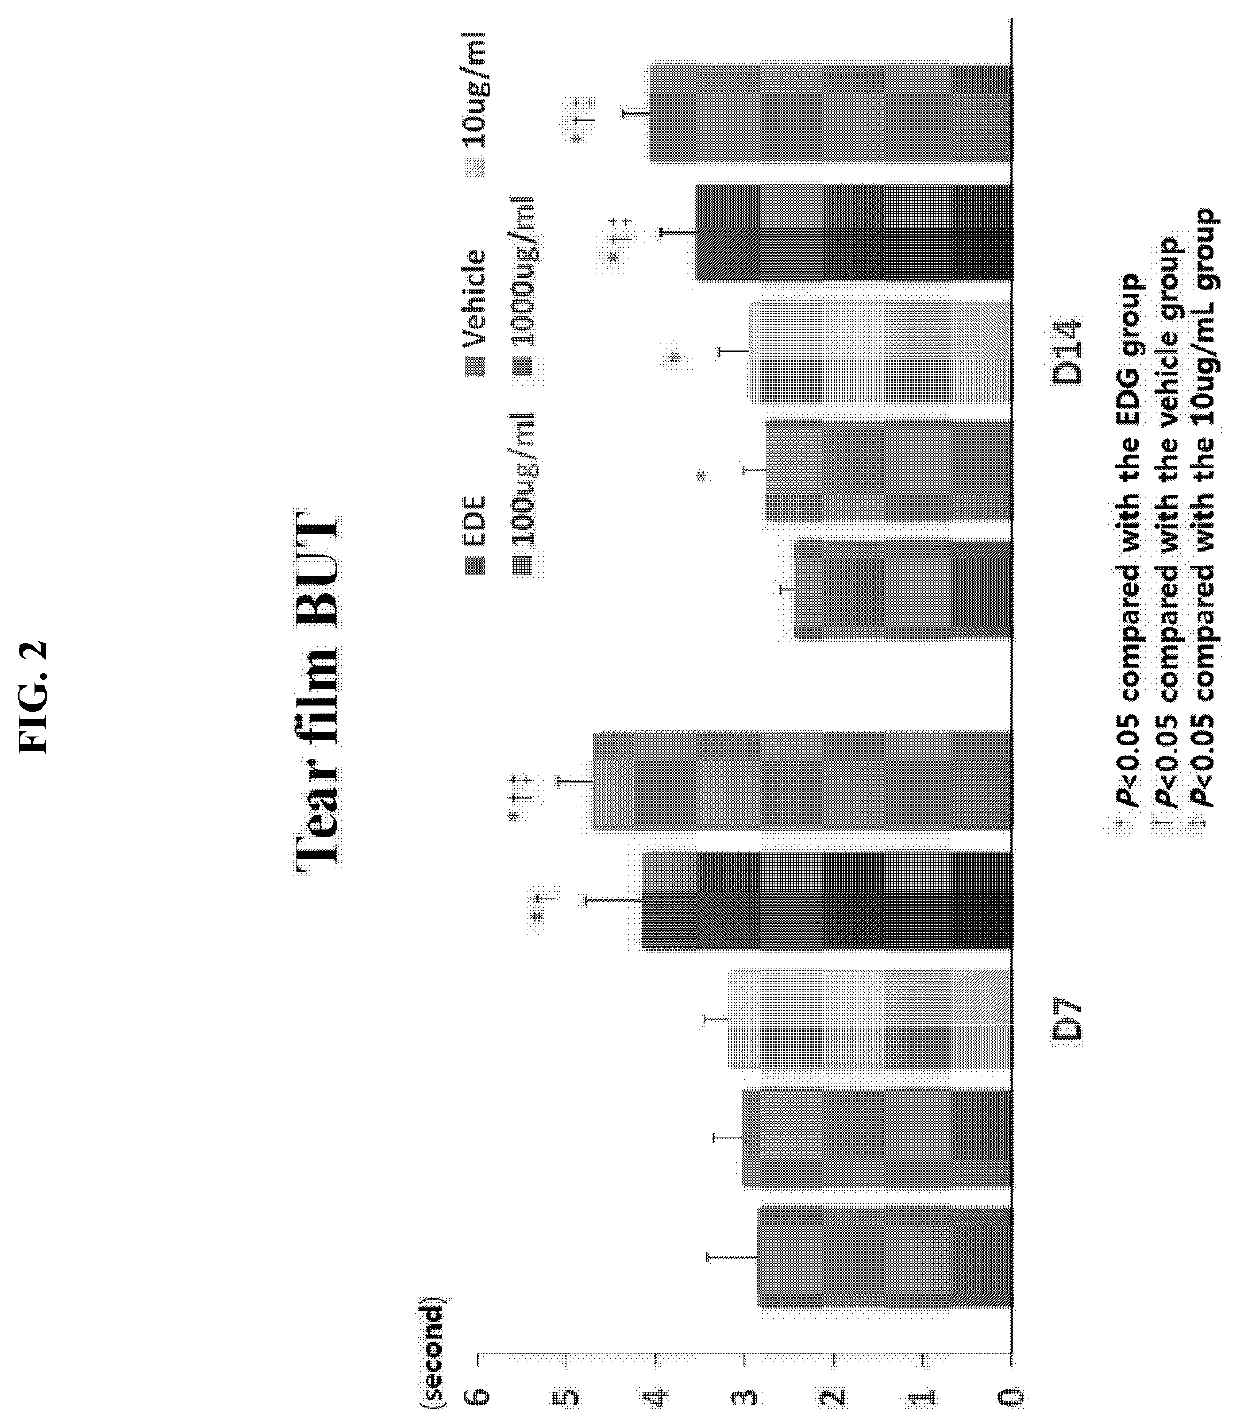 Pharmaceutical composition containing gly-thymosin beta-4 (gly-tb4) for treatment of dry eye